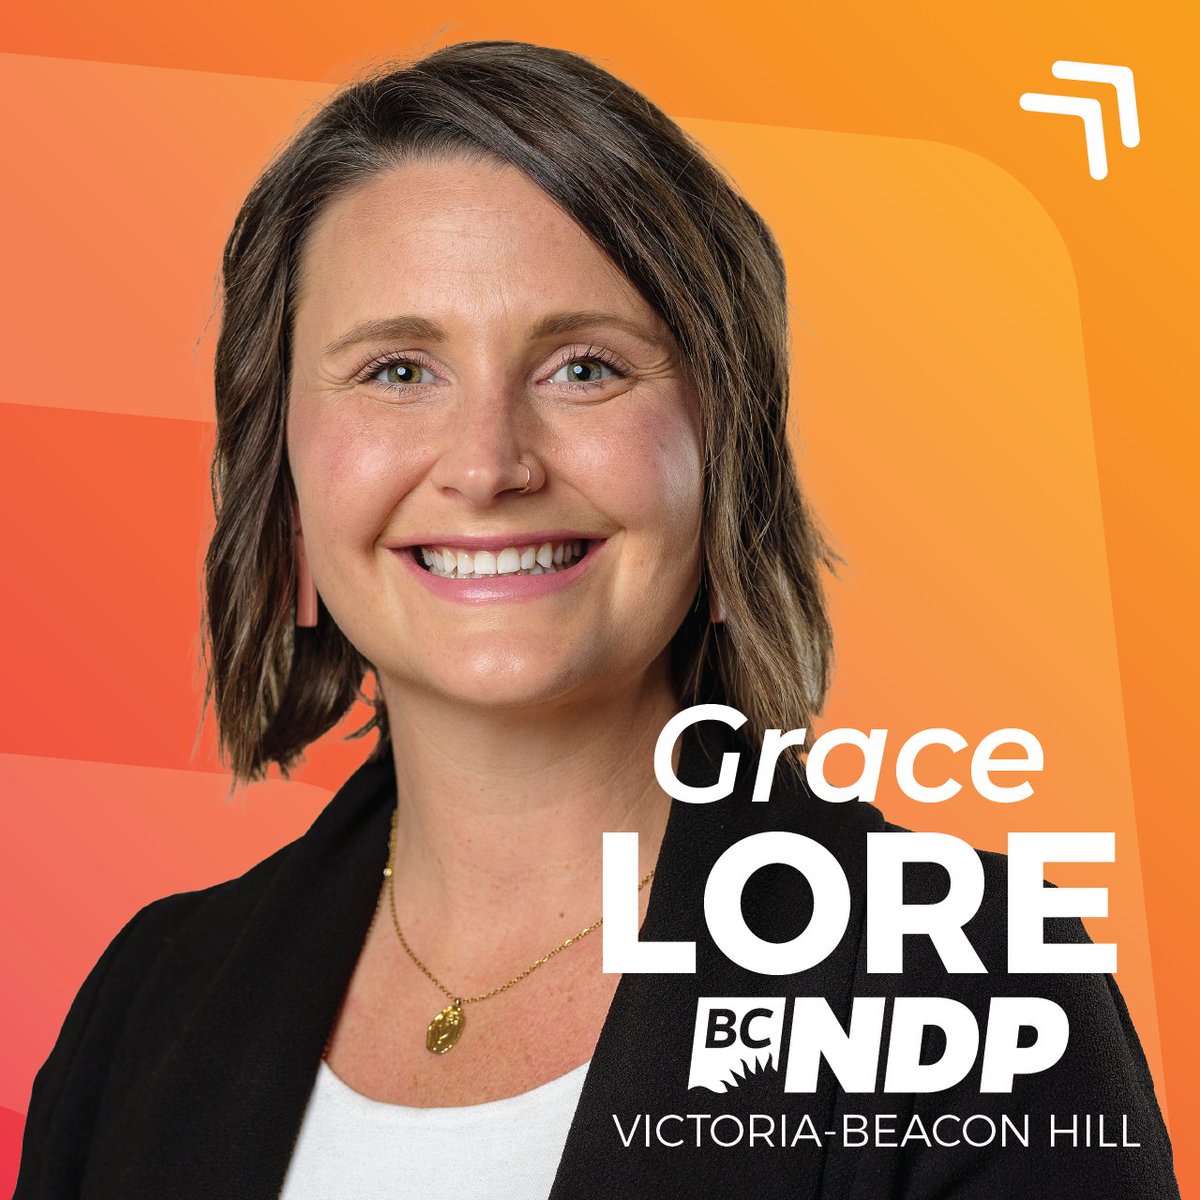 We’re thrilled to welcome back Grace Lore as the BC NDP candidate in Victoria-Beacon Hill. First elected in 2020, Grace is the Minister of Children & Family Development. She’s fighting so everyone in her community has the opportunity to build a good life there. Congrats, Grace!